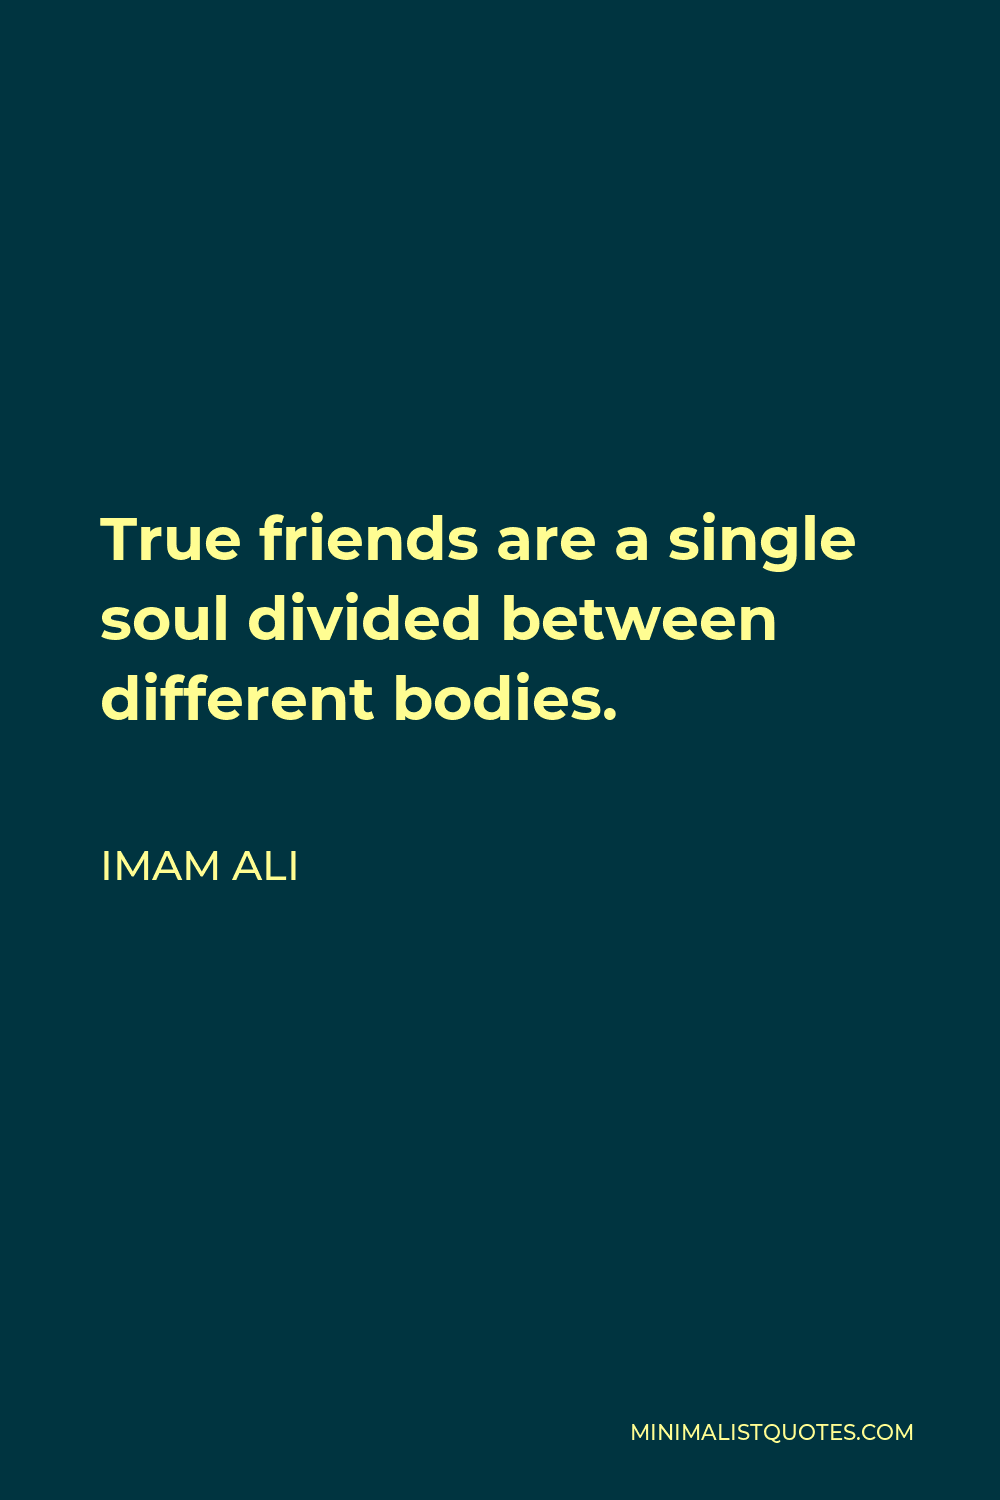 Imam Ali Quote: True friends are a single soul divided between ...